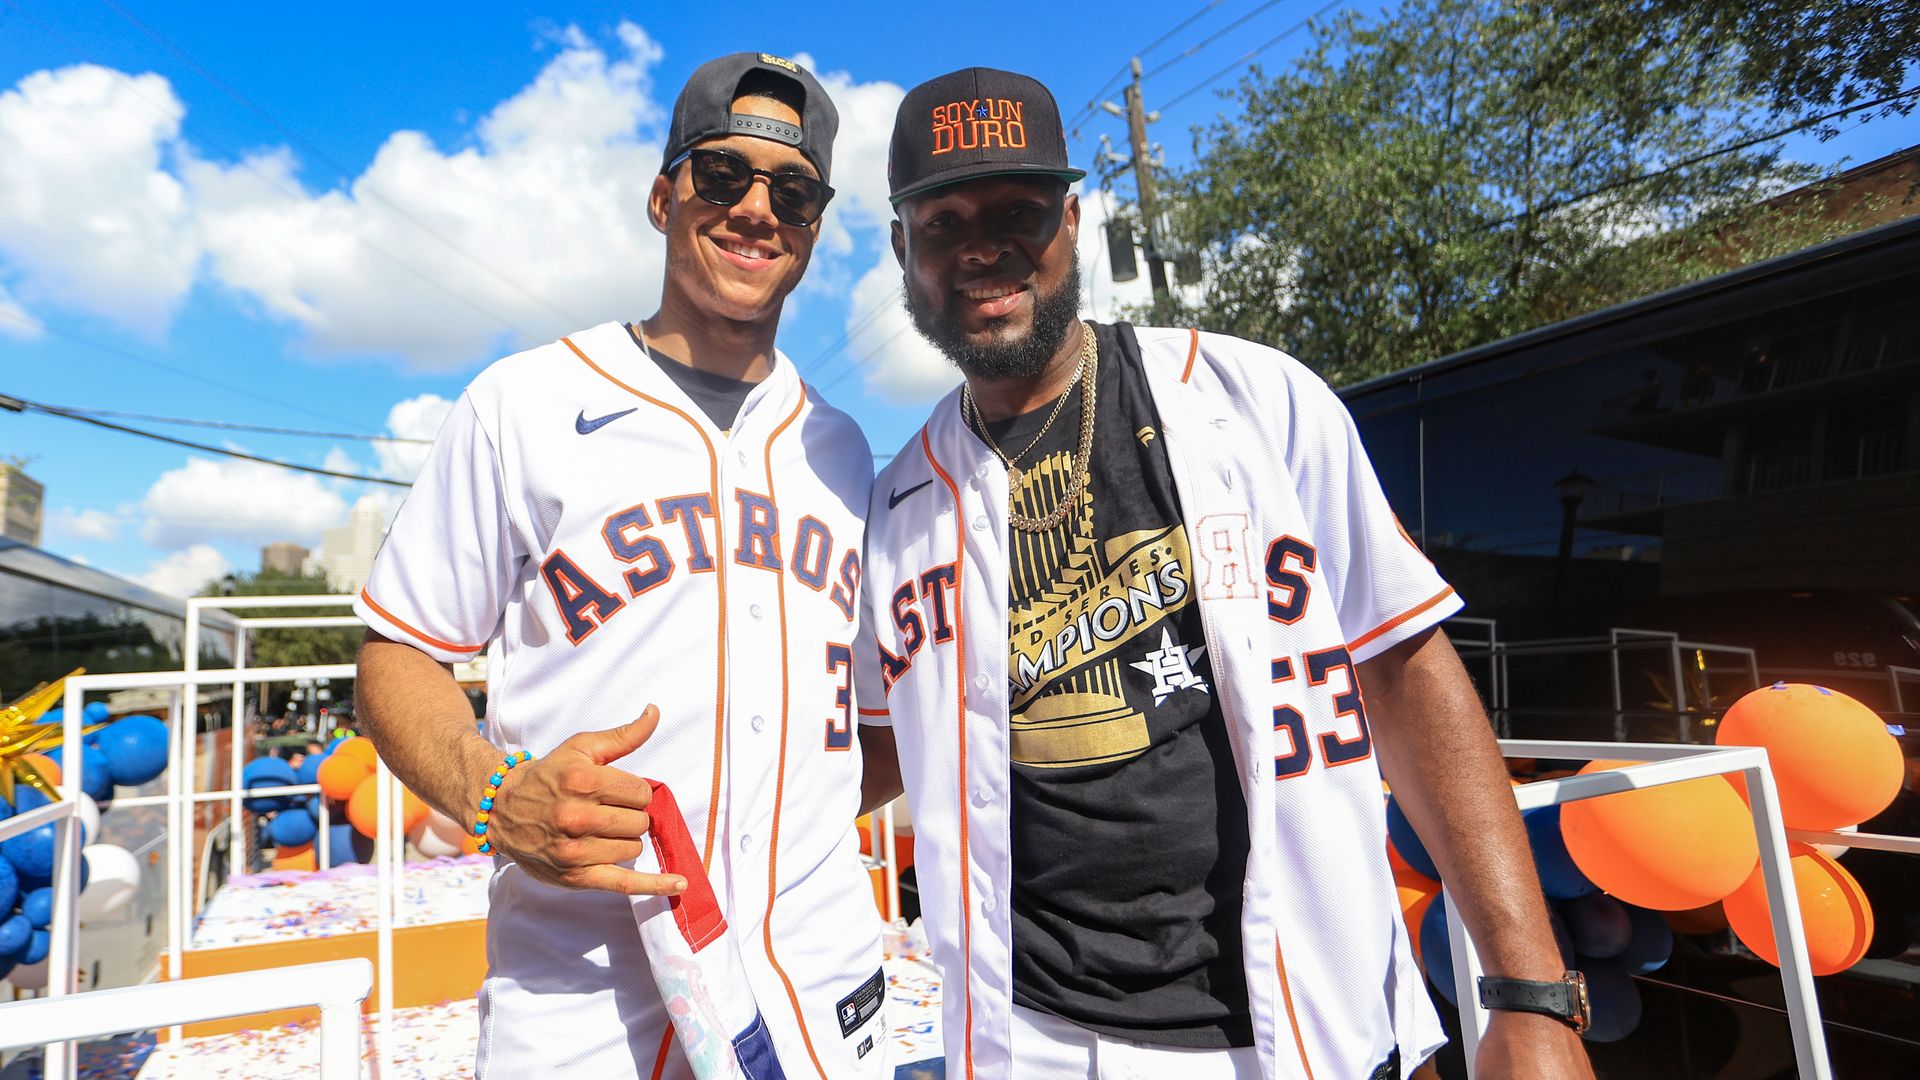 Astros players Jeremy Peña and Cristian Javier, wearing white Astros jerseys, pose for a photo atop a float during the 2022 World Series parade in Houston